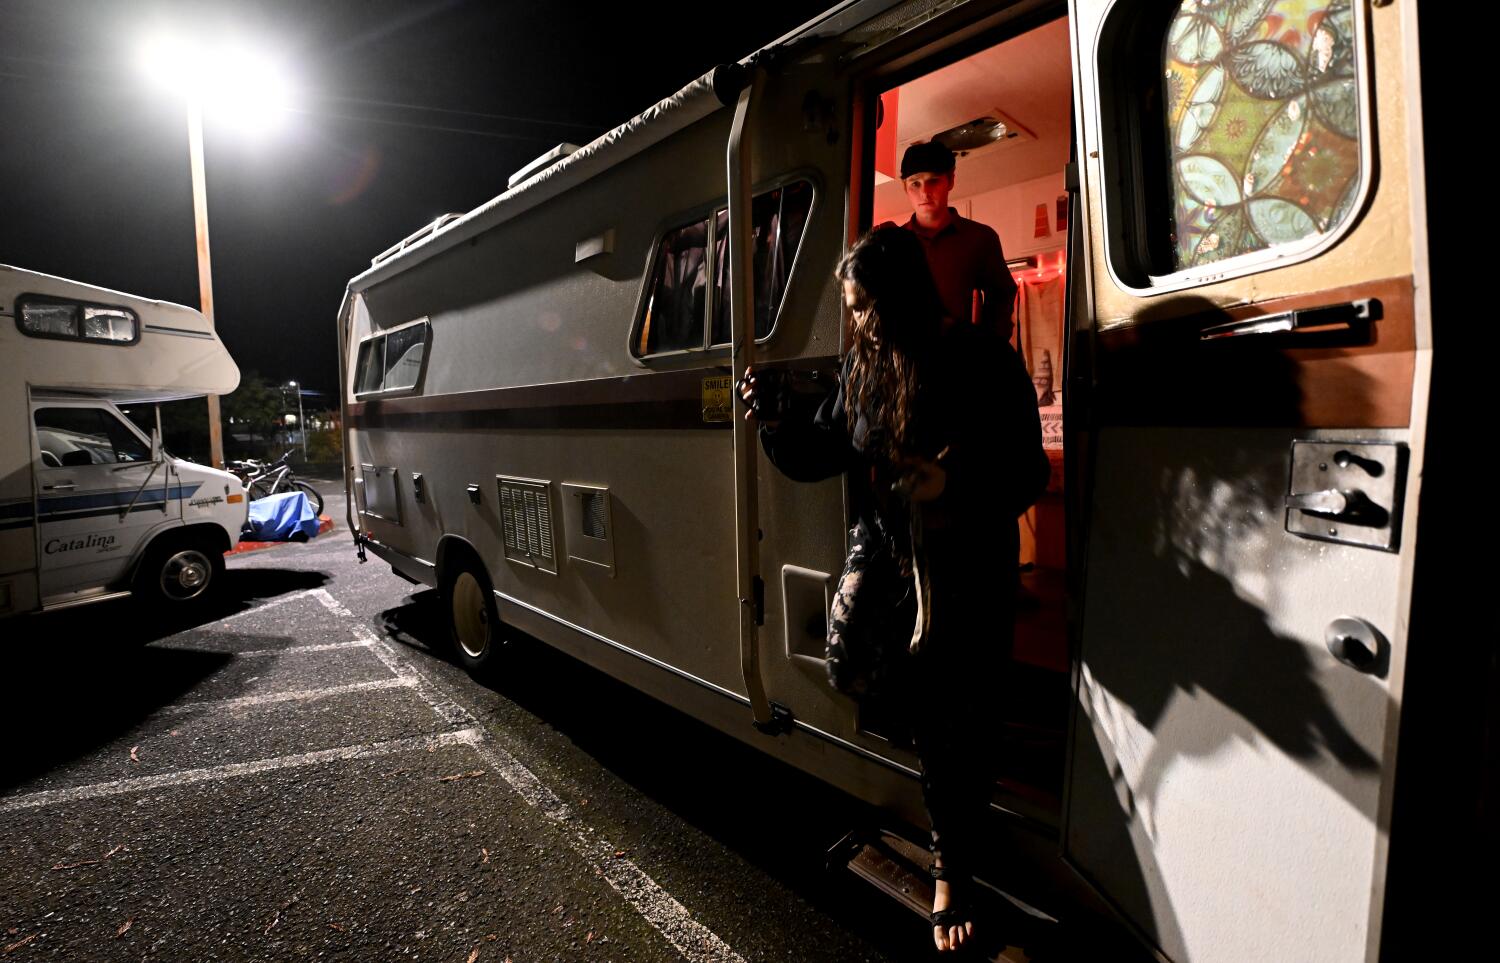 Cal Poly Humboldt students live in vehicles to afford college. They were ordered off campus. 